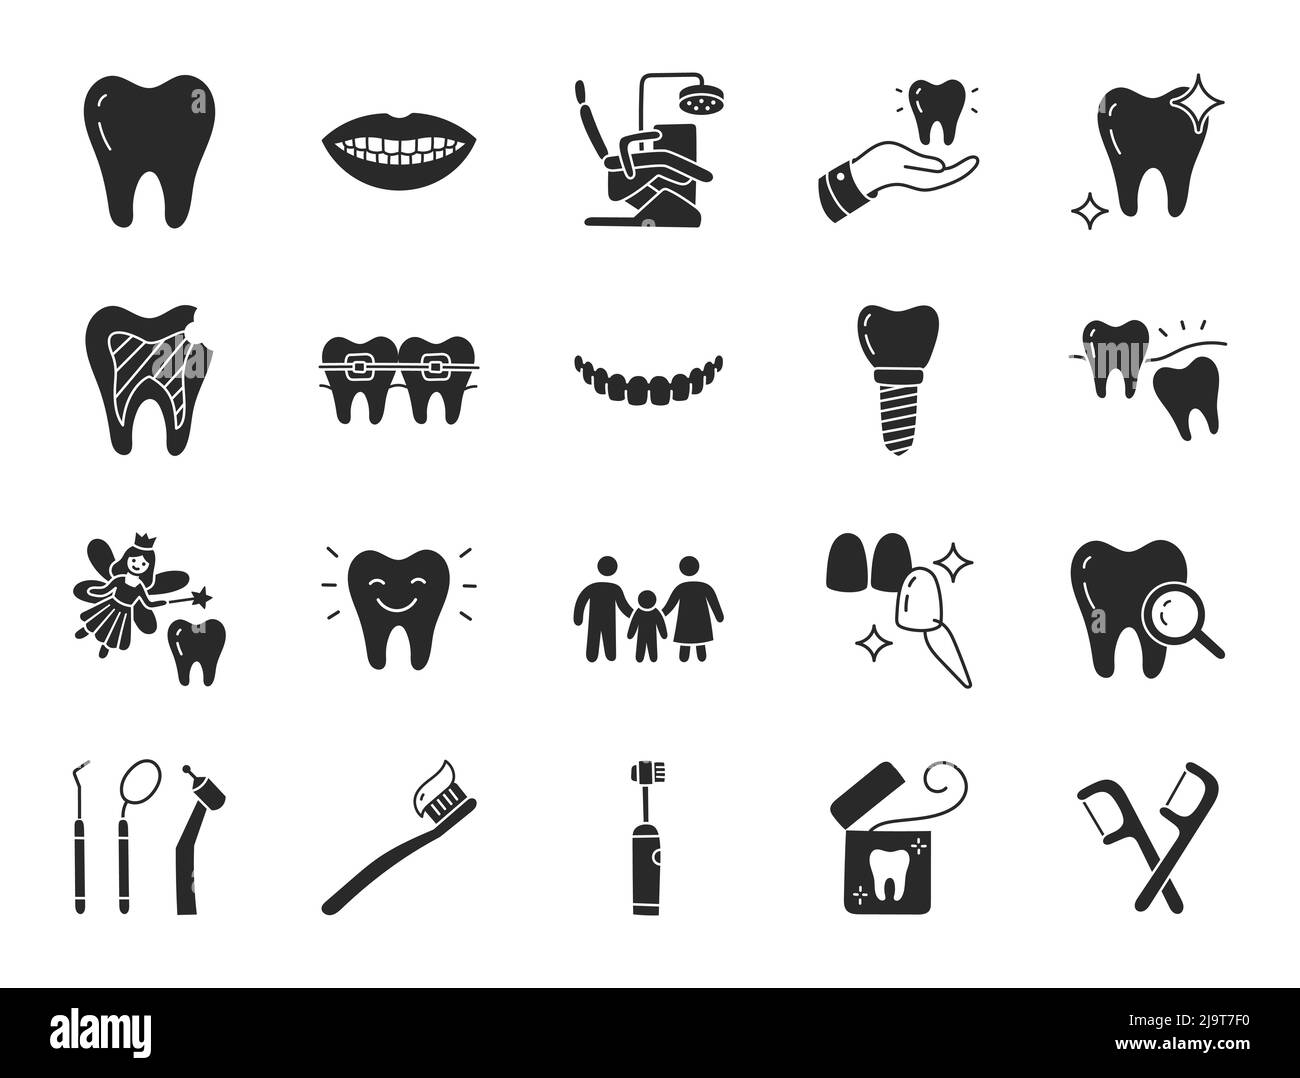 Dental clinic doodle illustration including flat icons - wisdom tooth, veneer, teeth whitening, braces, implant, toothbrush, caries, floss, mouth Stock Vector